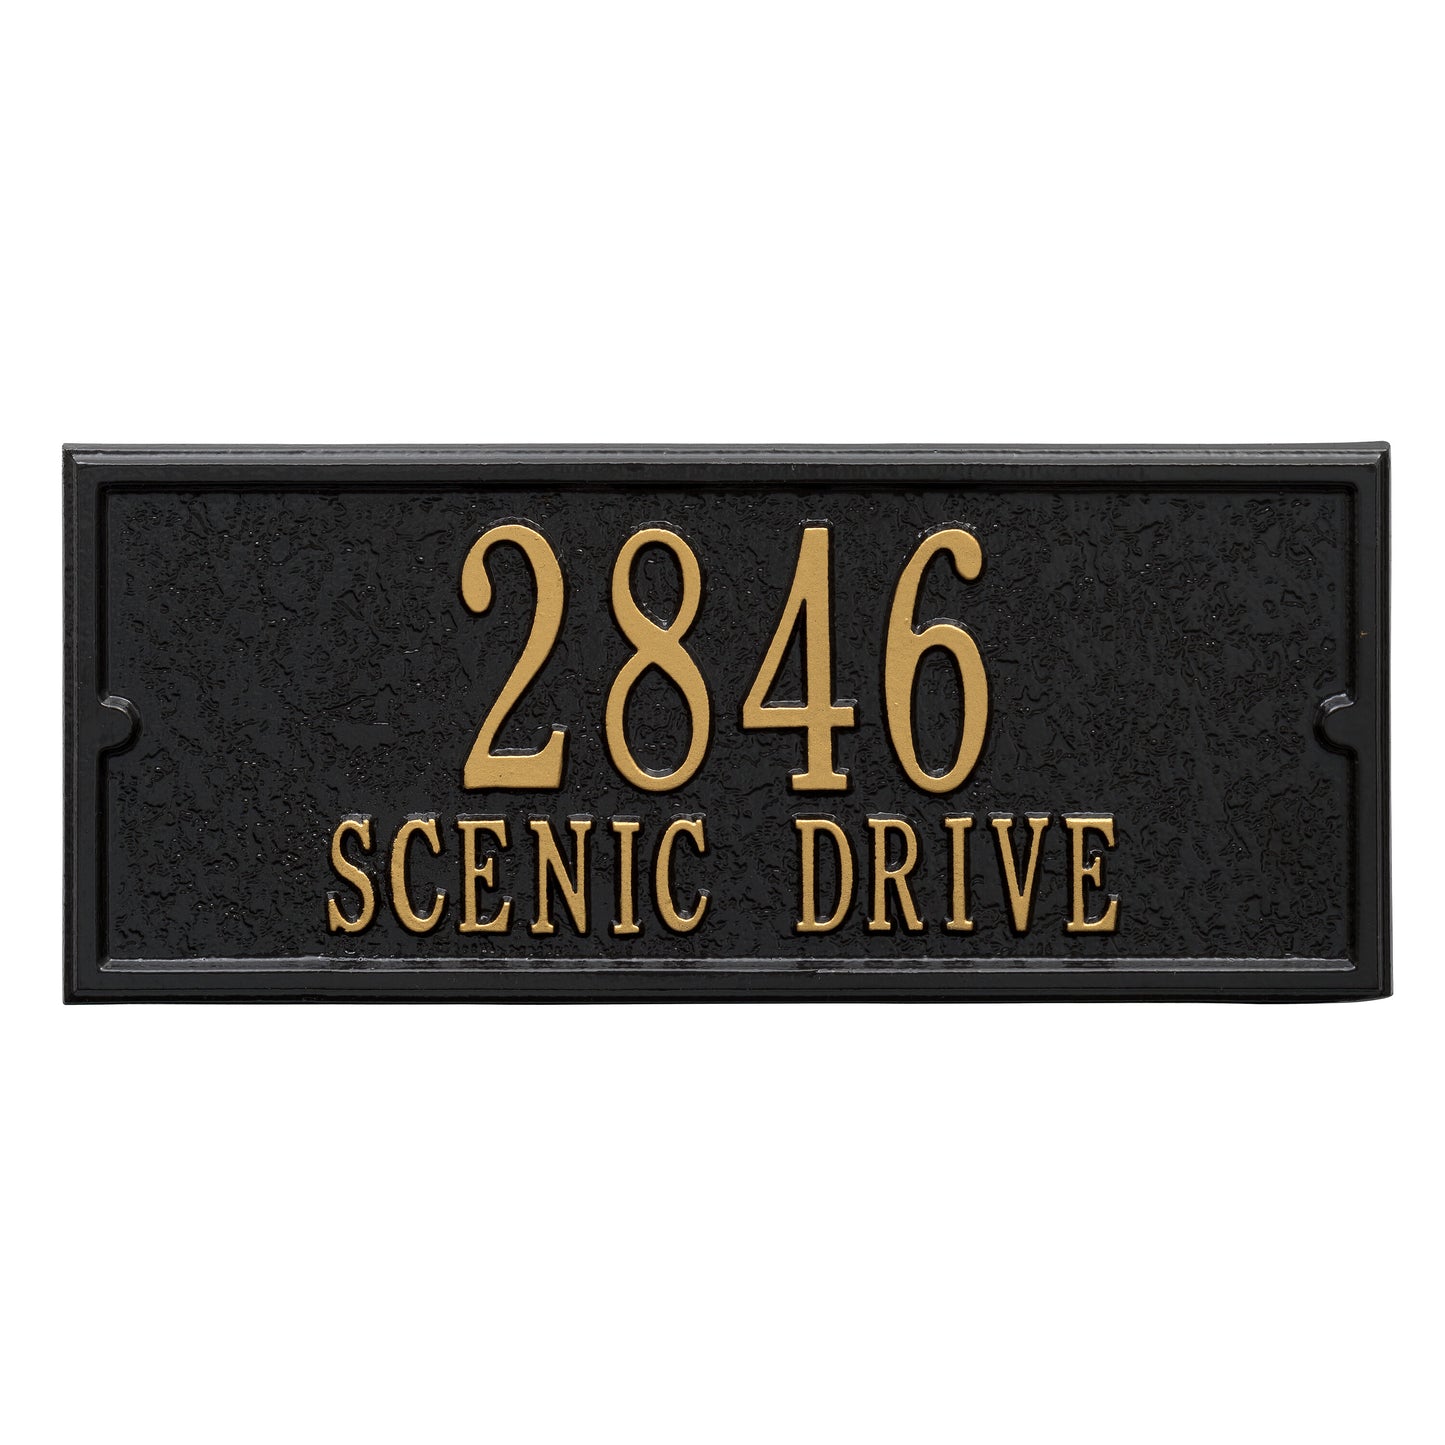 Whitehall Products Personalized Mailbox Side Address Plaque White/gold